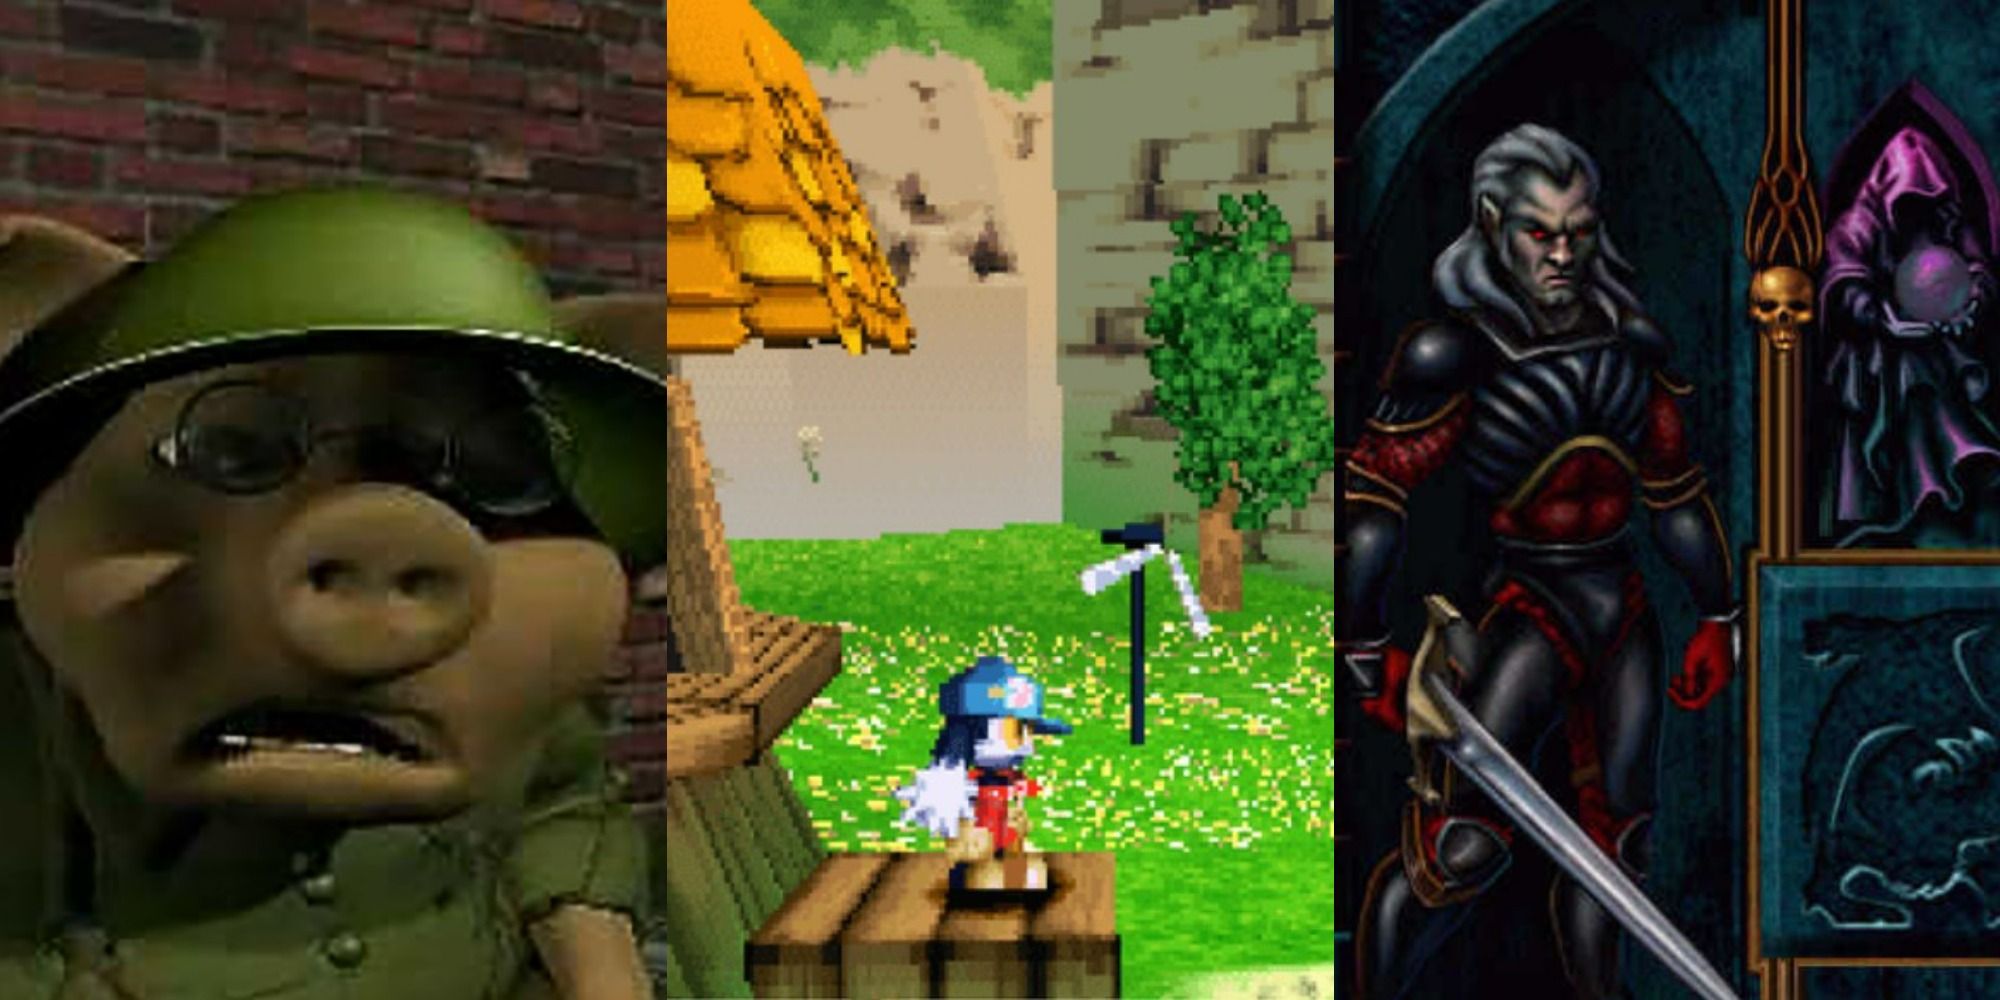 hogs of war pig soldier, klonoa on platform in grassland, kain with armor and sword in legacy of kain blood omen